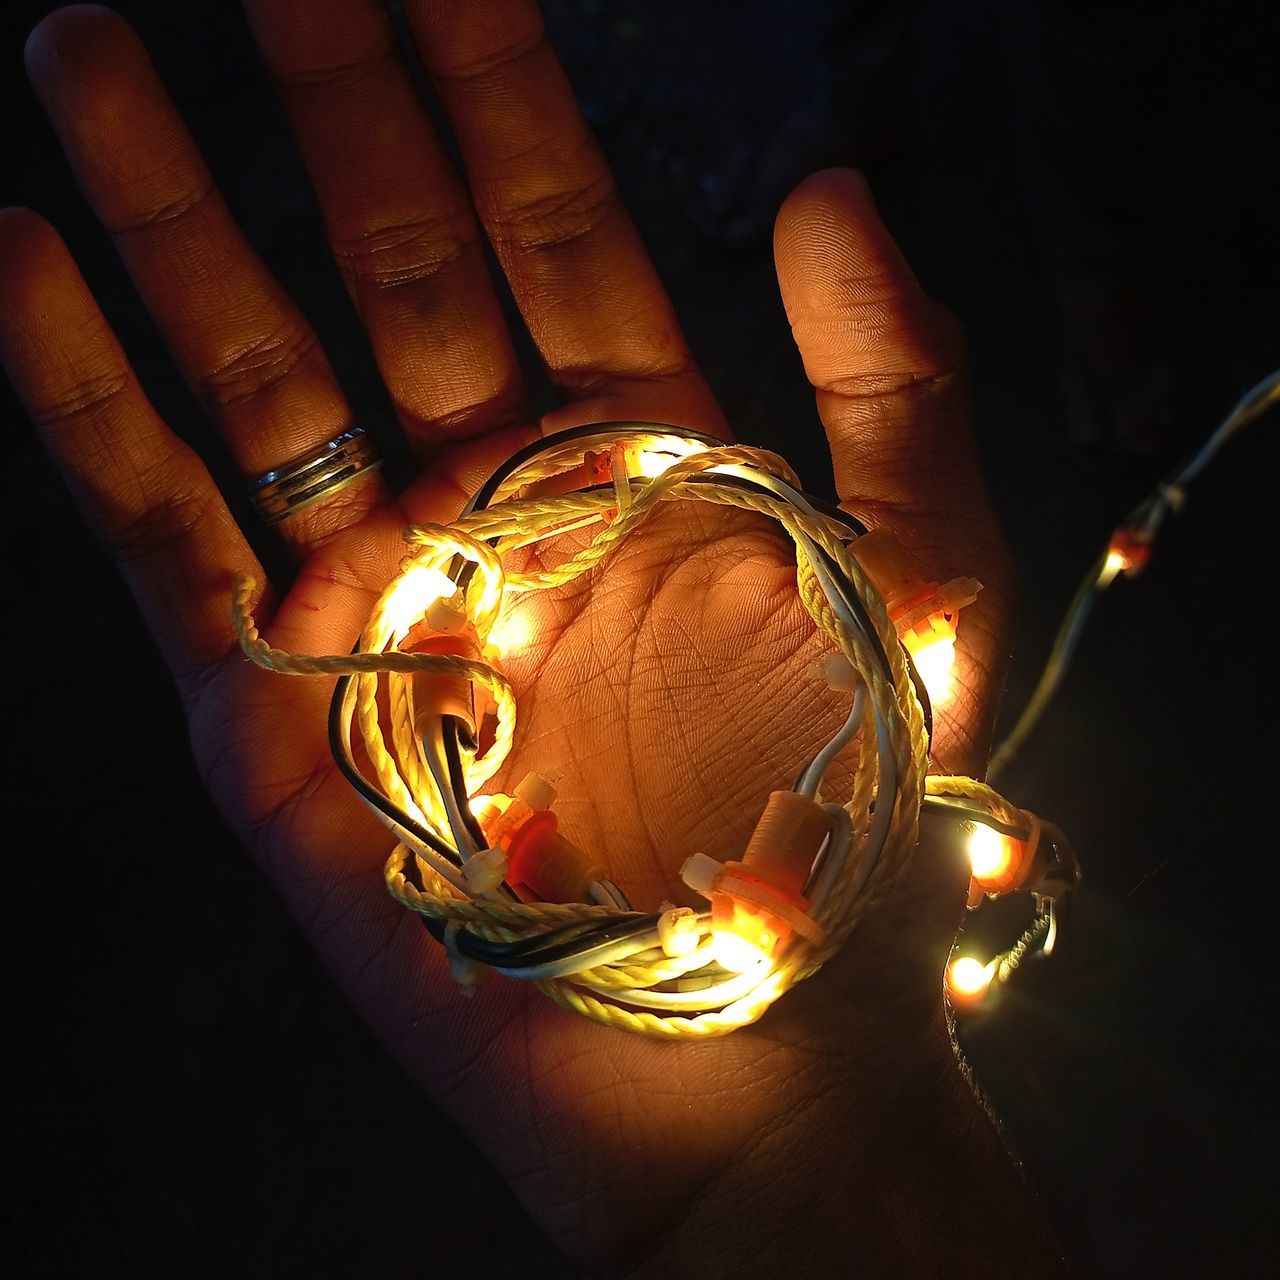 hand, yellow, light, lighting, one person, darkness, holding, illuminated, finger, indoors, night, close-up, lighting equipment, burning, glowing, candle, fire, flame, gold, macro photography, incandescent light bulb, adult, jewellery